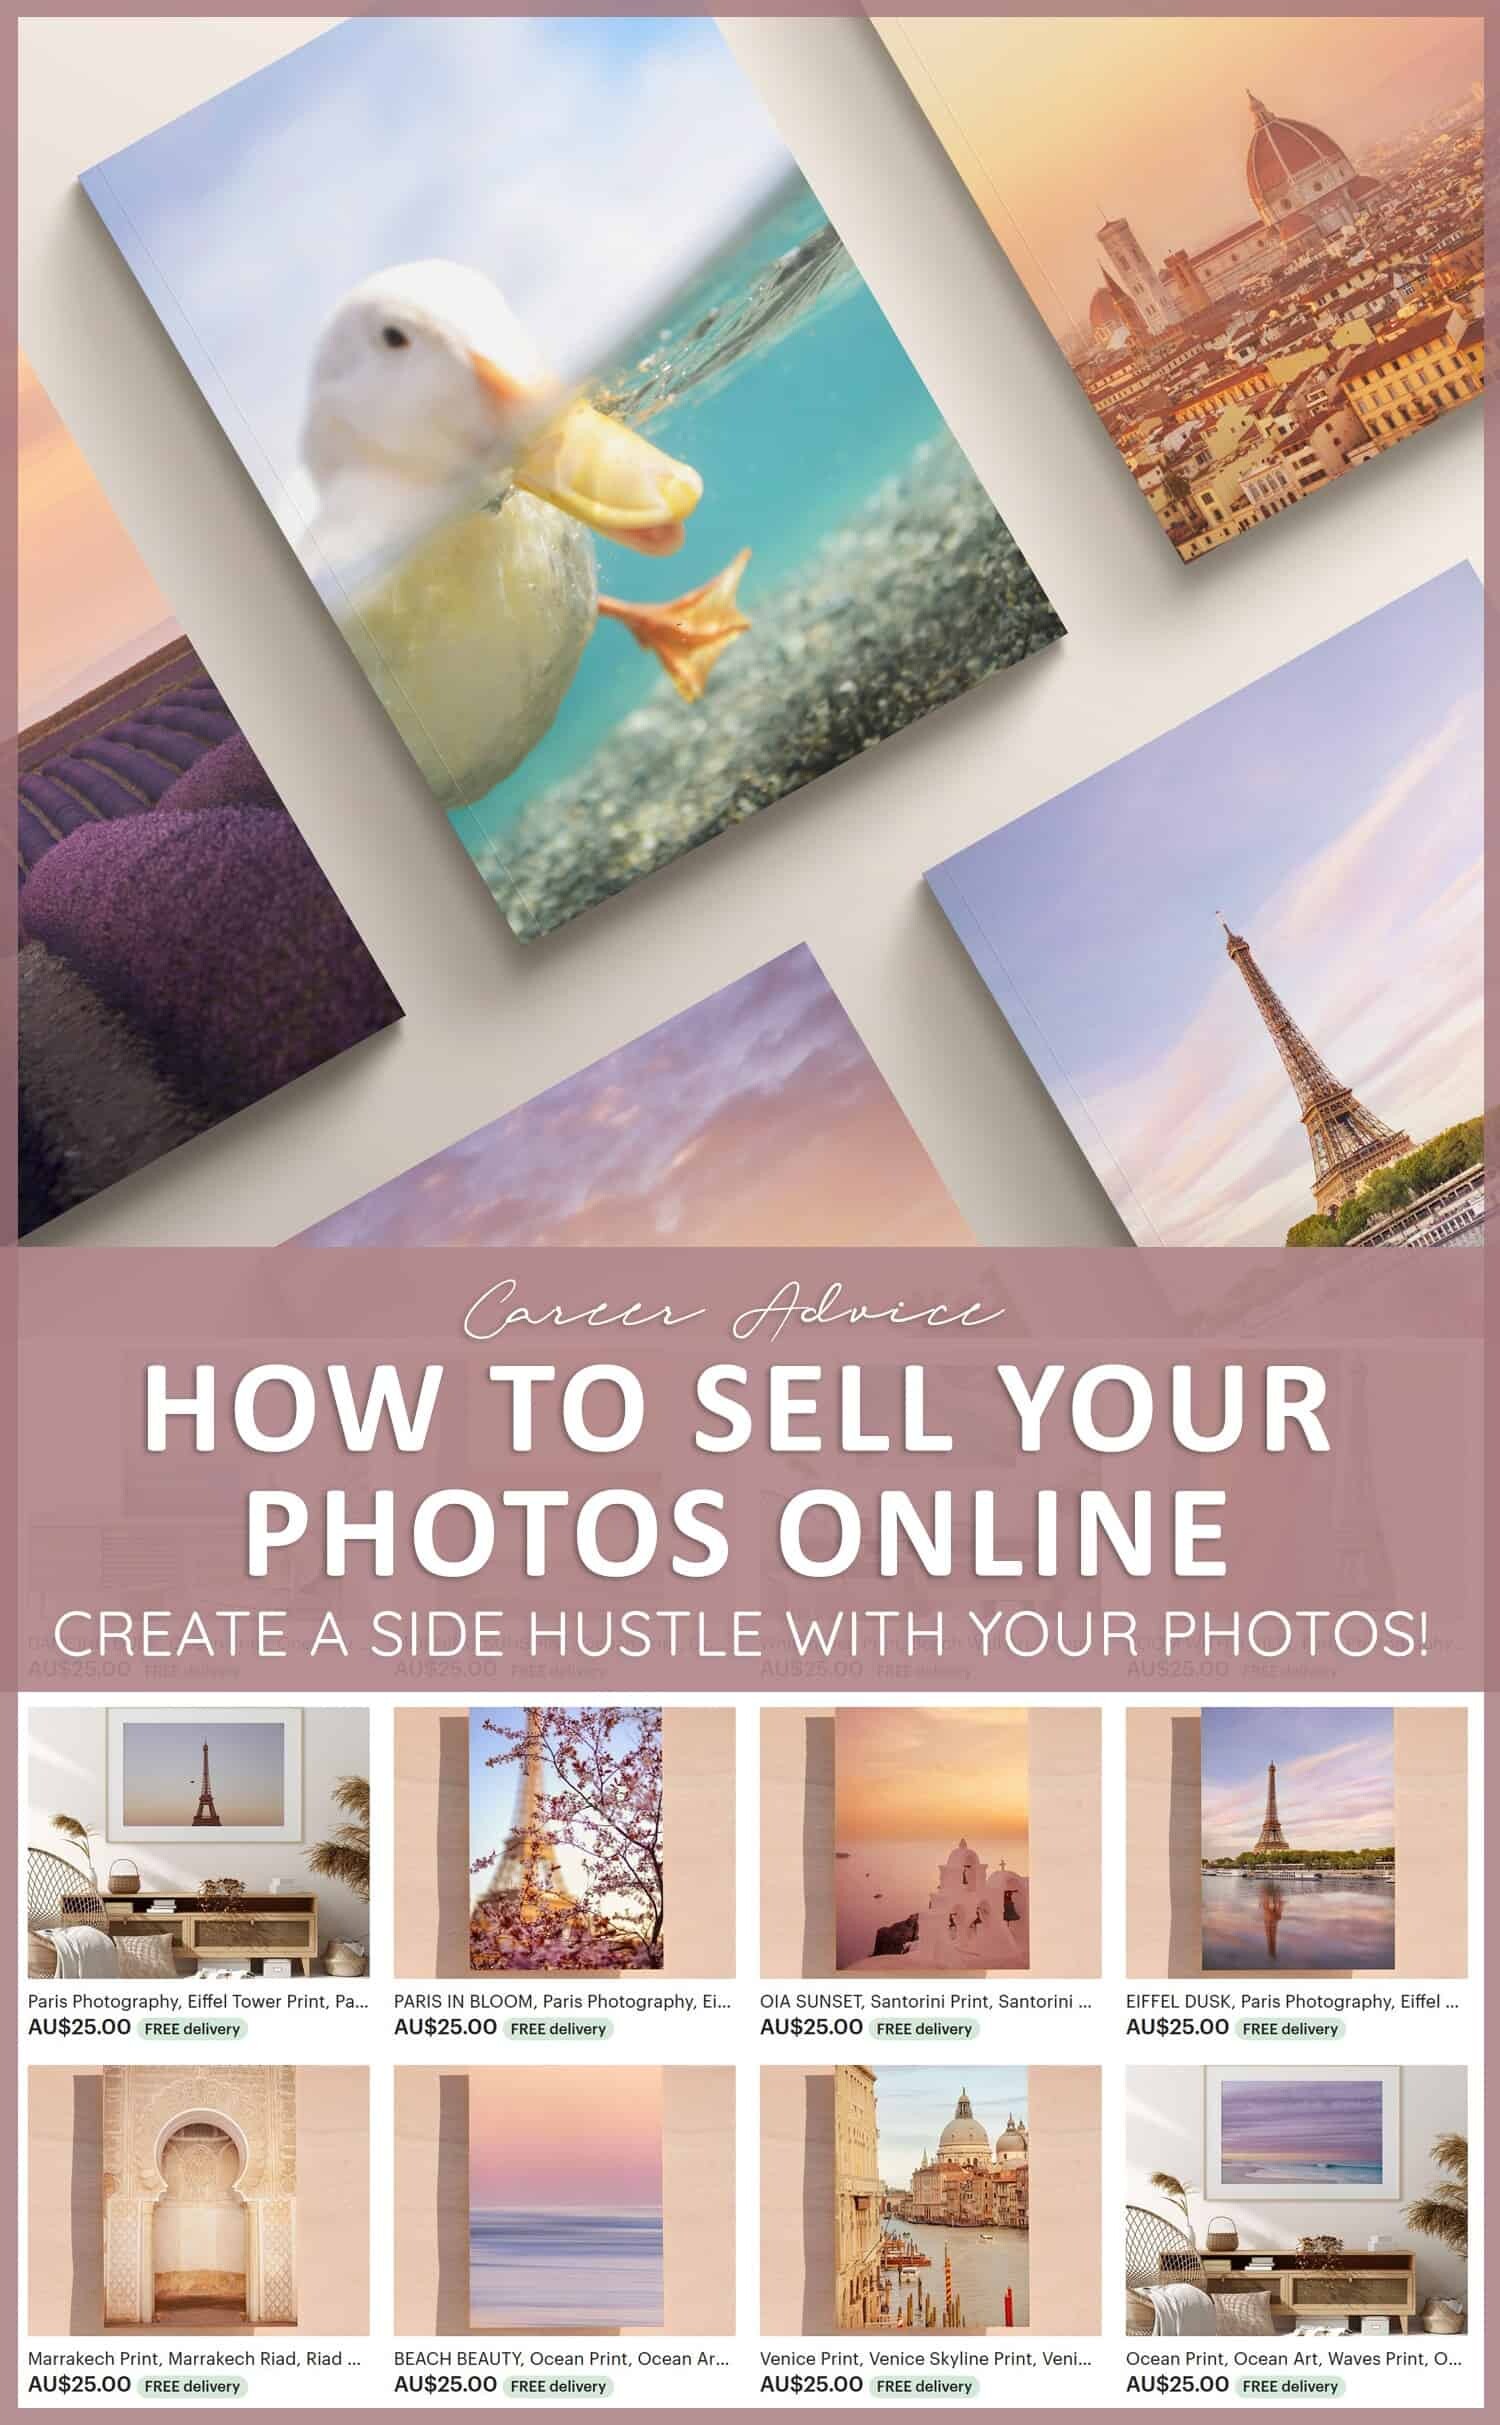 Sell Photos Online - A Guide to Selling photos online as a photographer